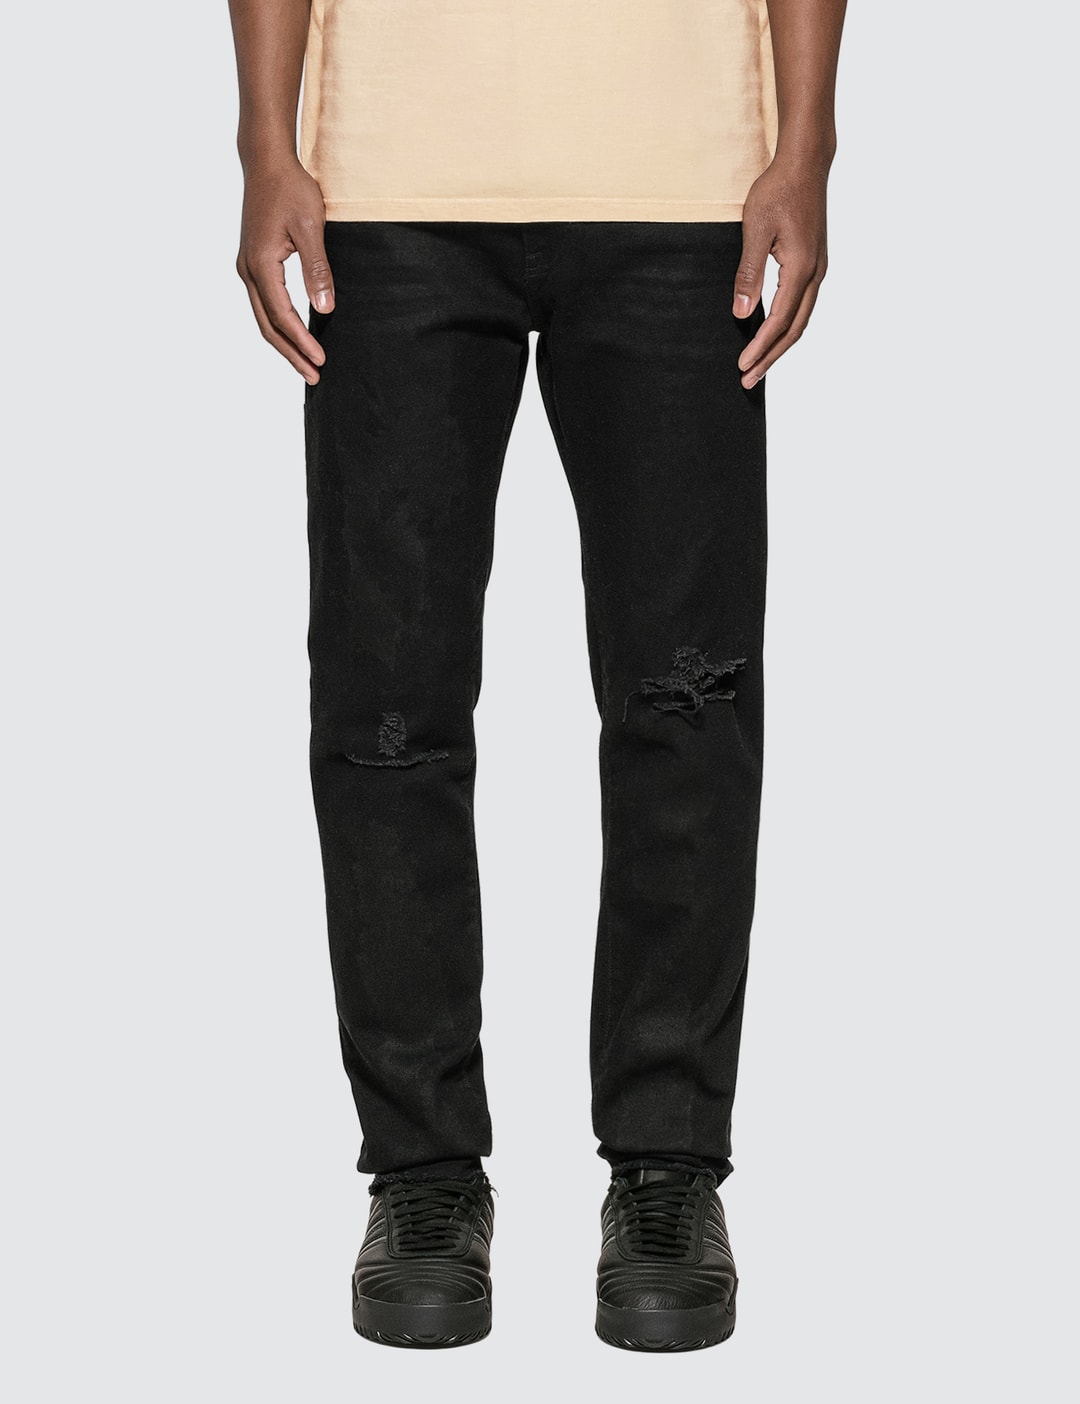 424 - 4 Pocket Jeans | HBX - Globally Curated Fashion and Lifestyle by ...